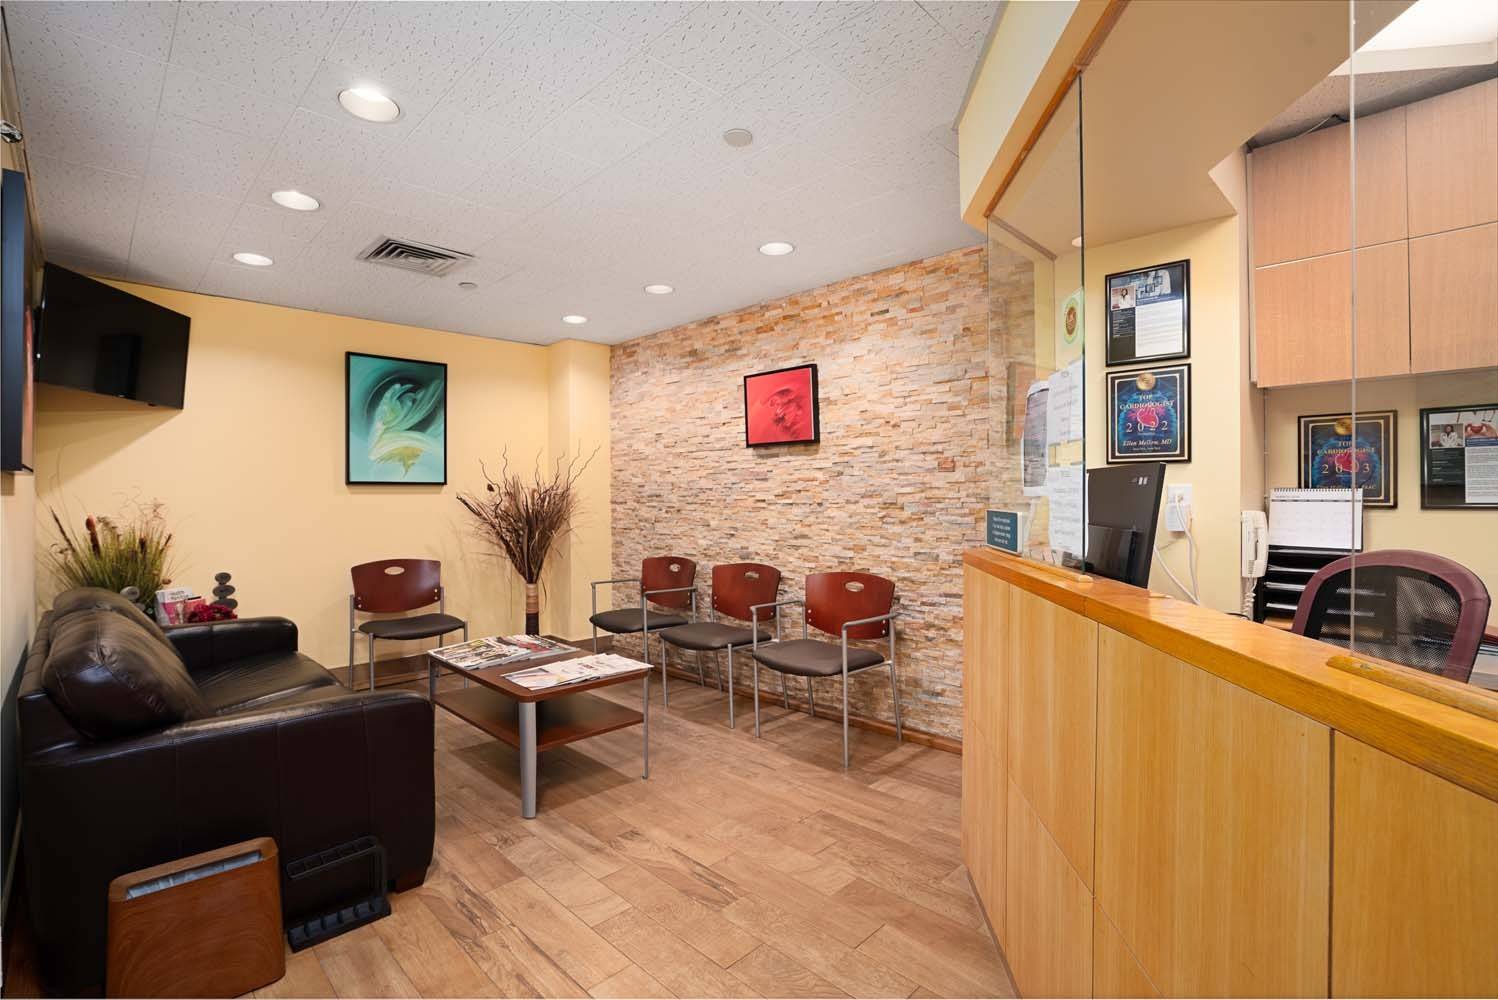 PRICE IMPROVEMENT ! ! MEDICAL CONDO RENOVATED JUST FOUR YEARS AGO !